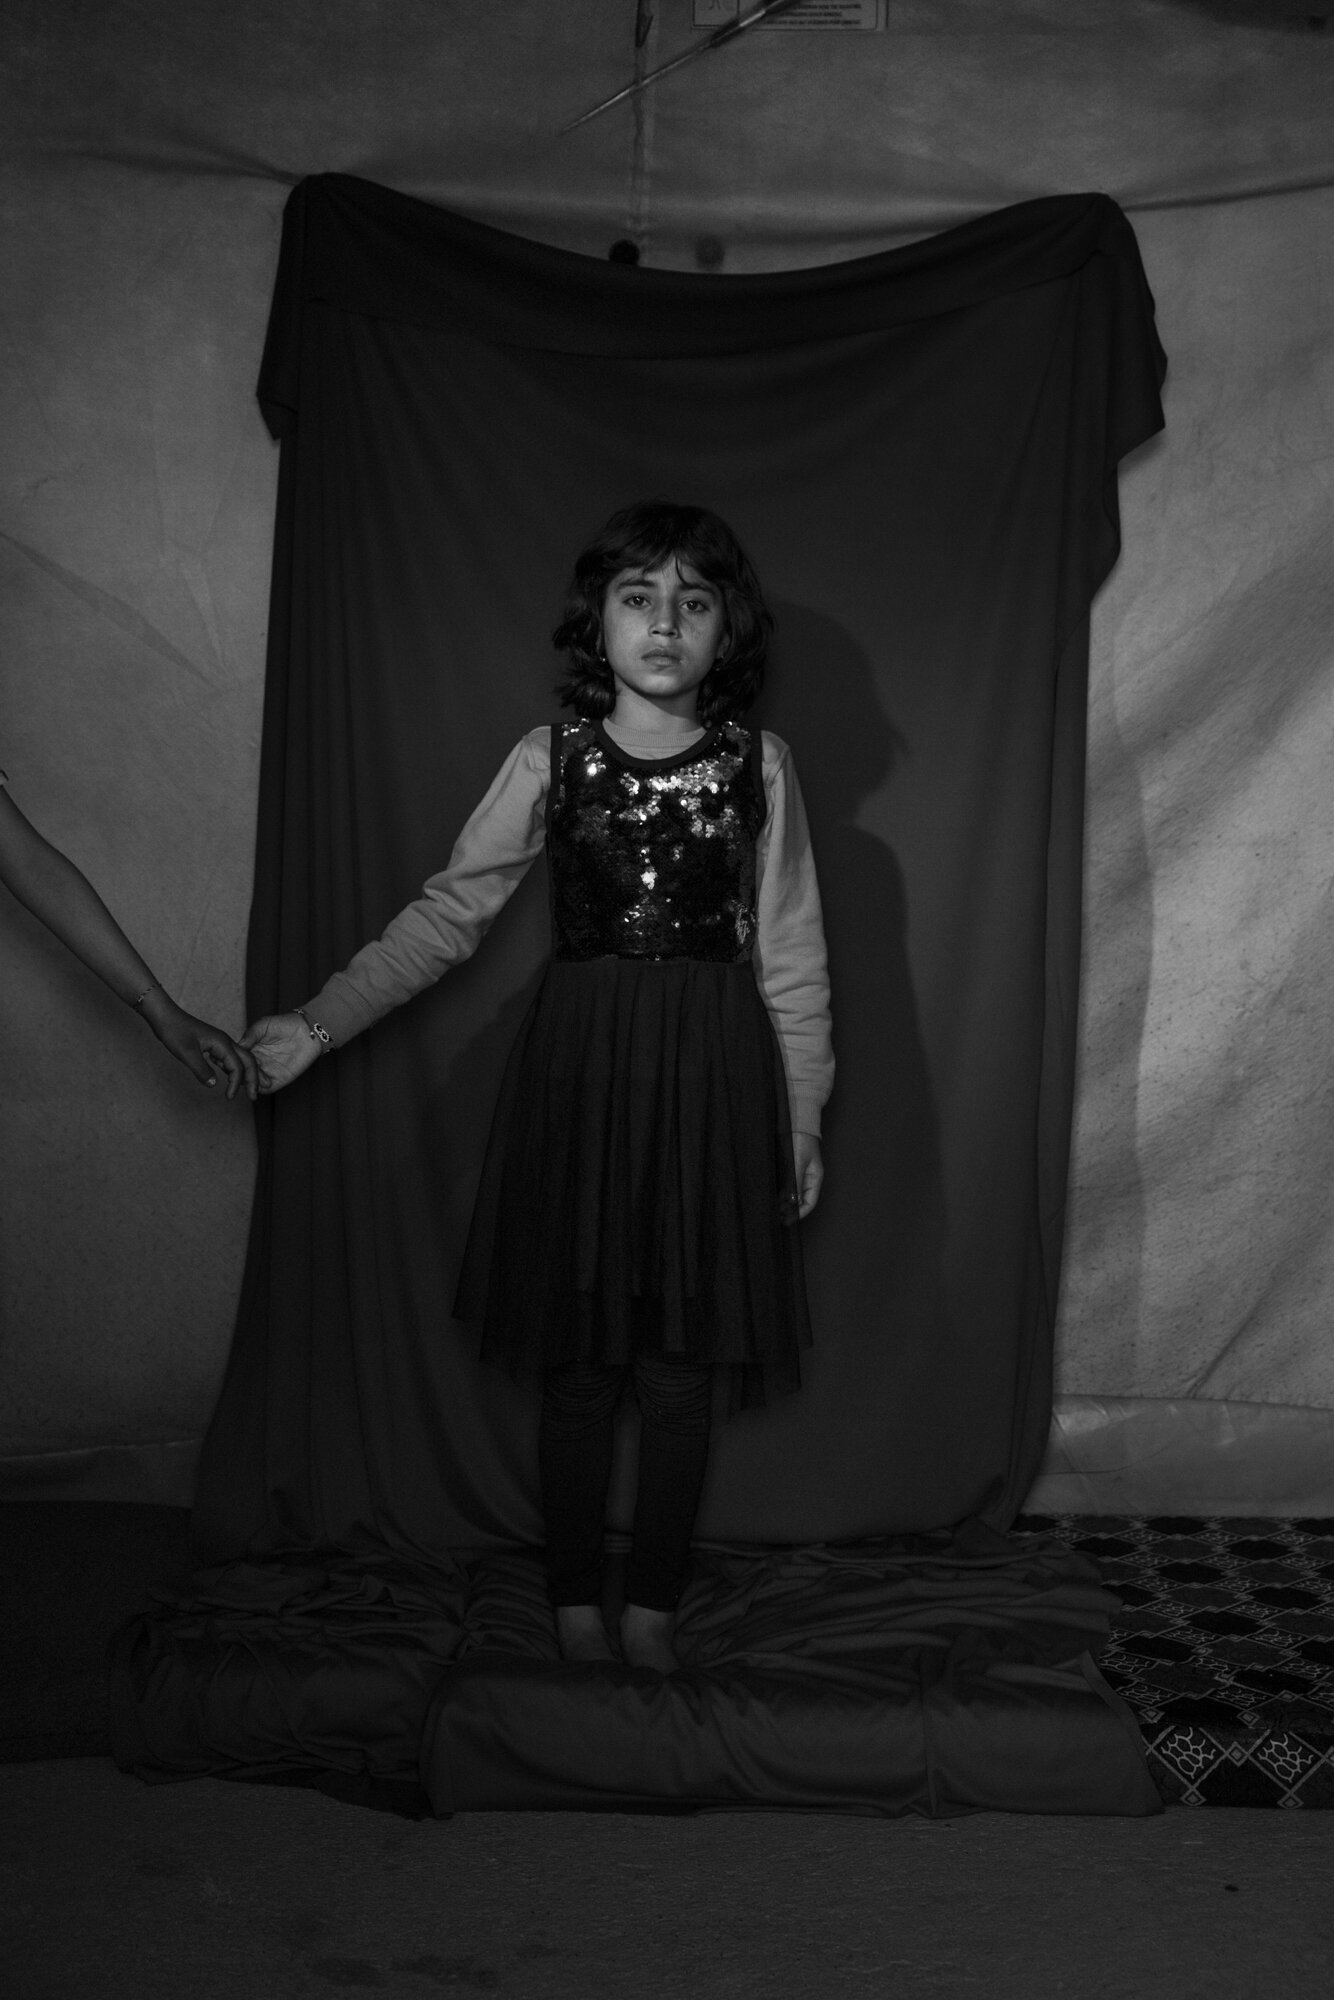  Hediya is 9. She spent five years enslaved by ISIS with her sister Kristina. Iraq, 2019. 